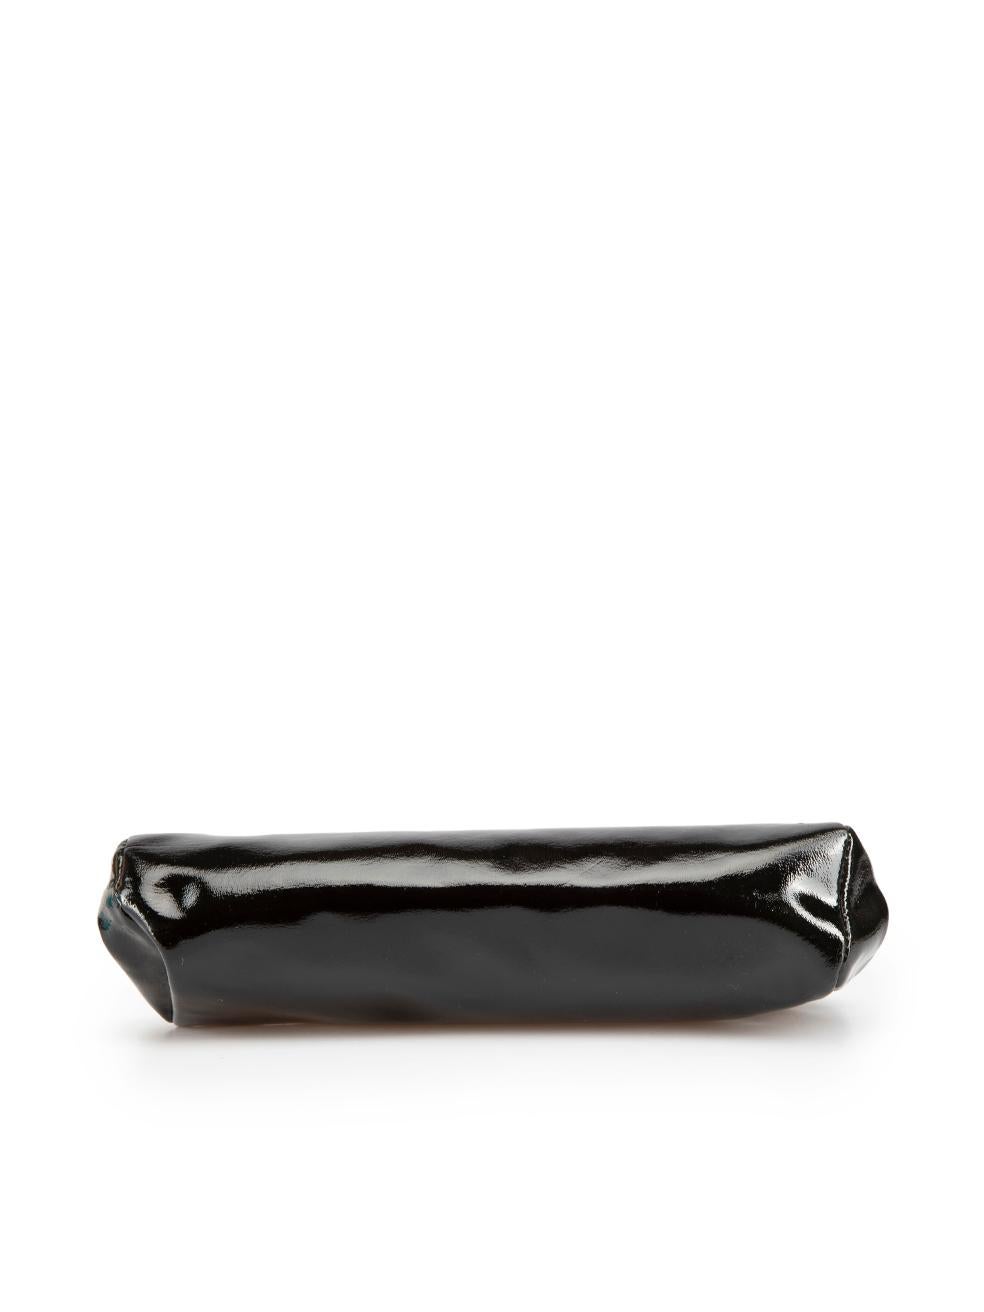 Women's Marni Black Patent Leather Clutch For Sale